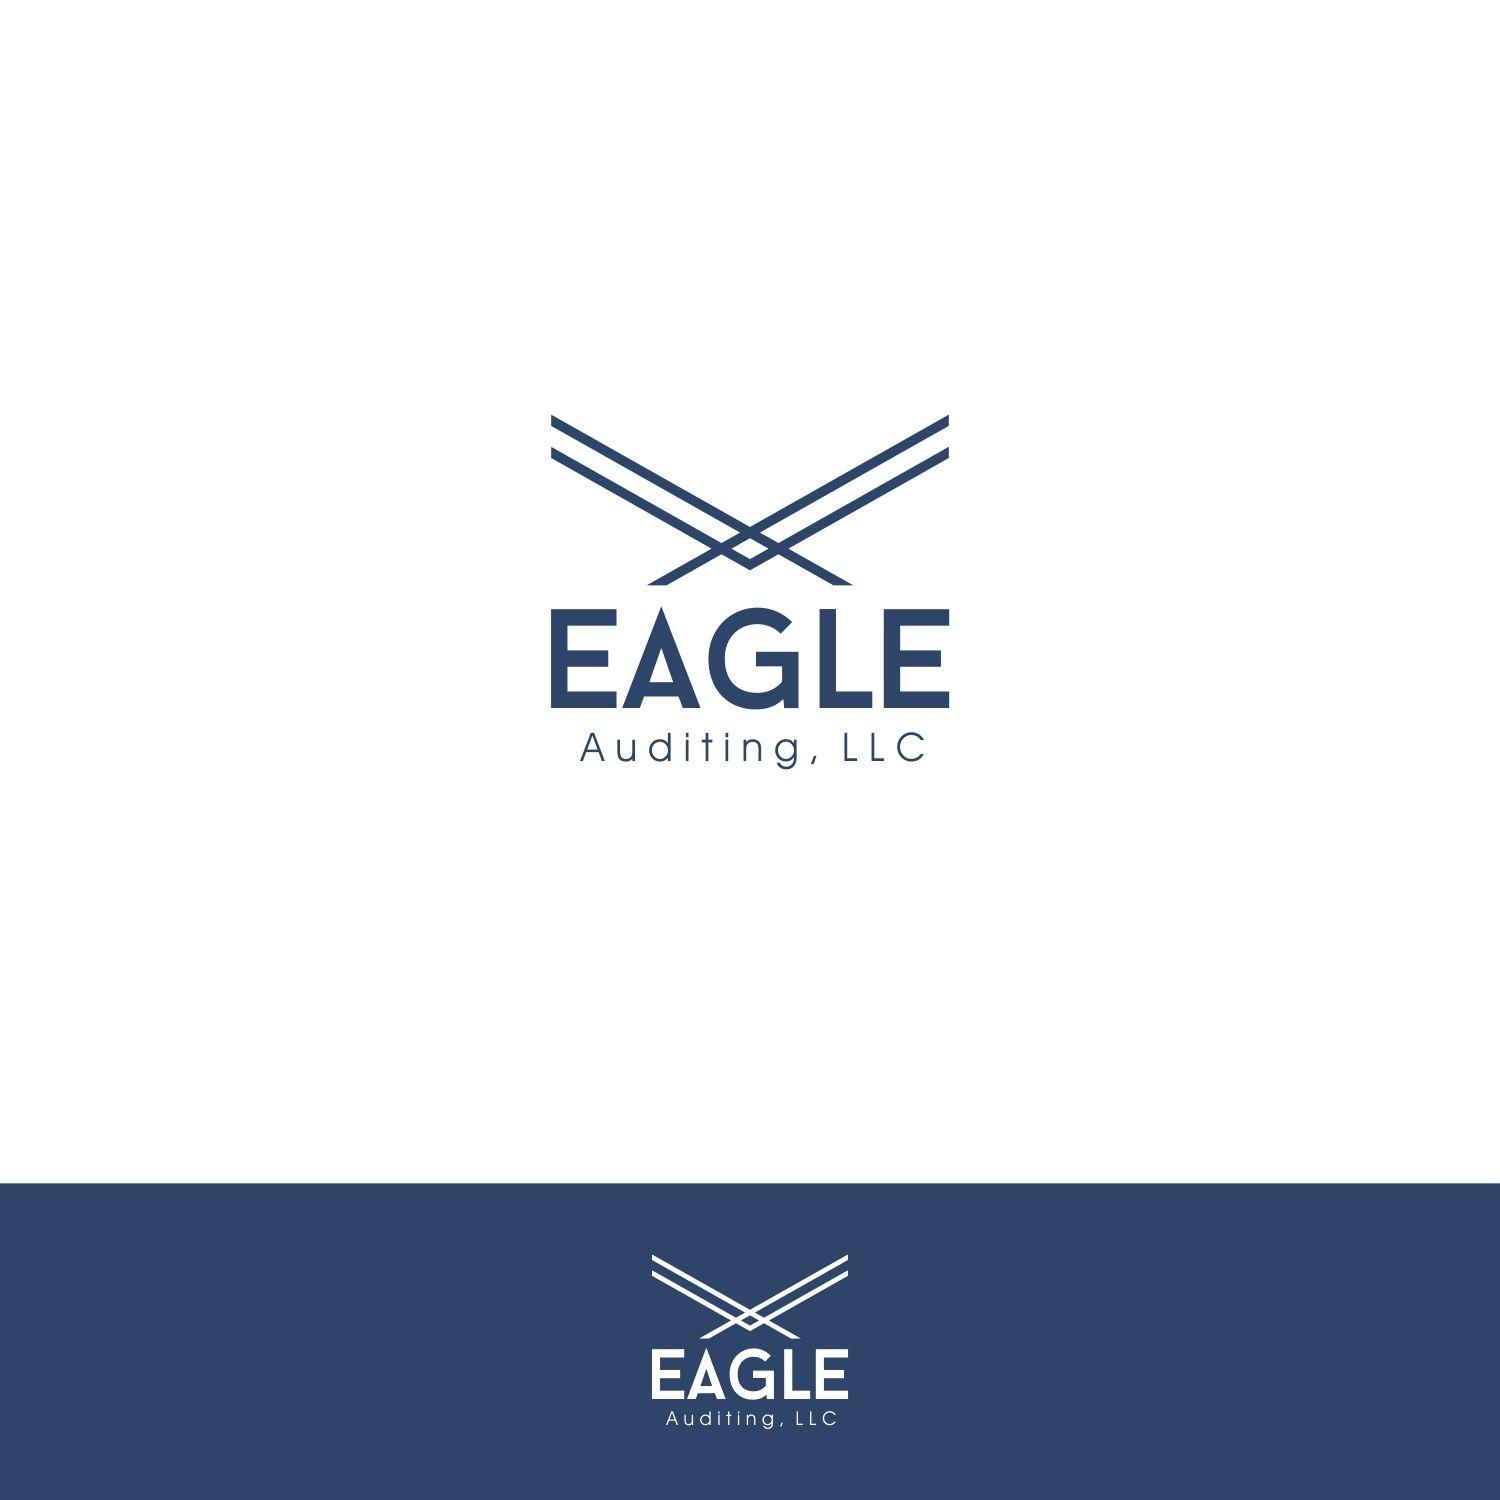 Contemporary Logo - Serious, Modern, Auditing Logo Design for Eagle Auditing, LLC by ...